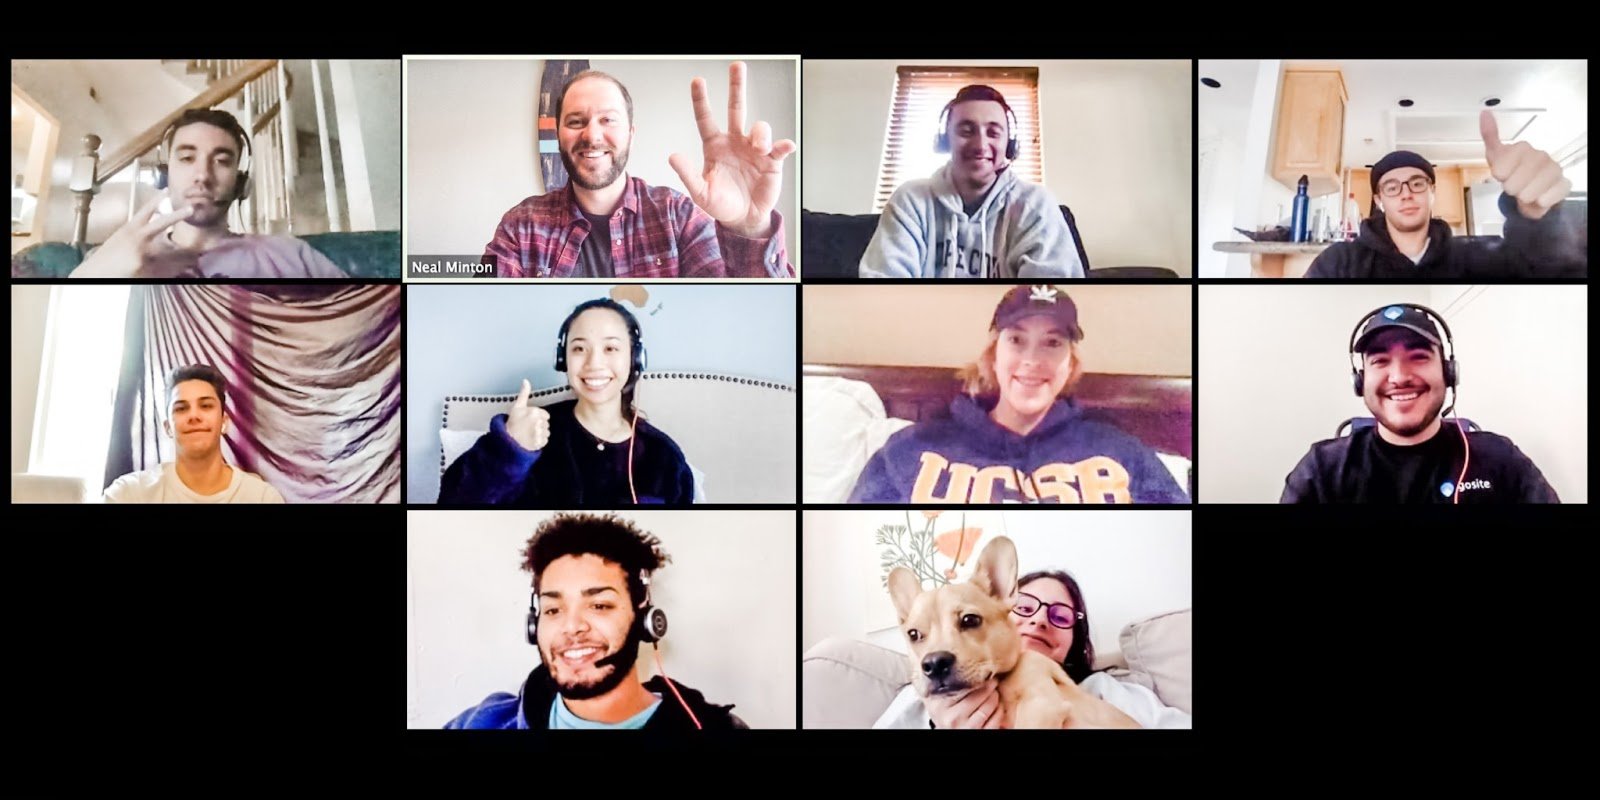 gosite team members participating in a virtual meeting